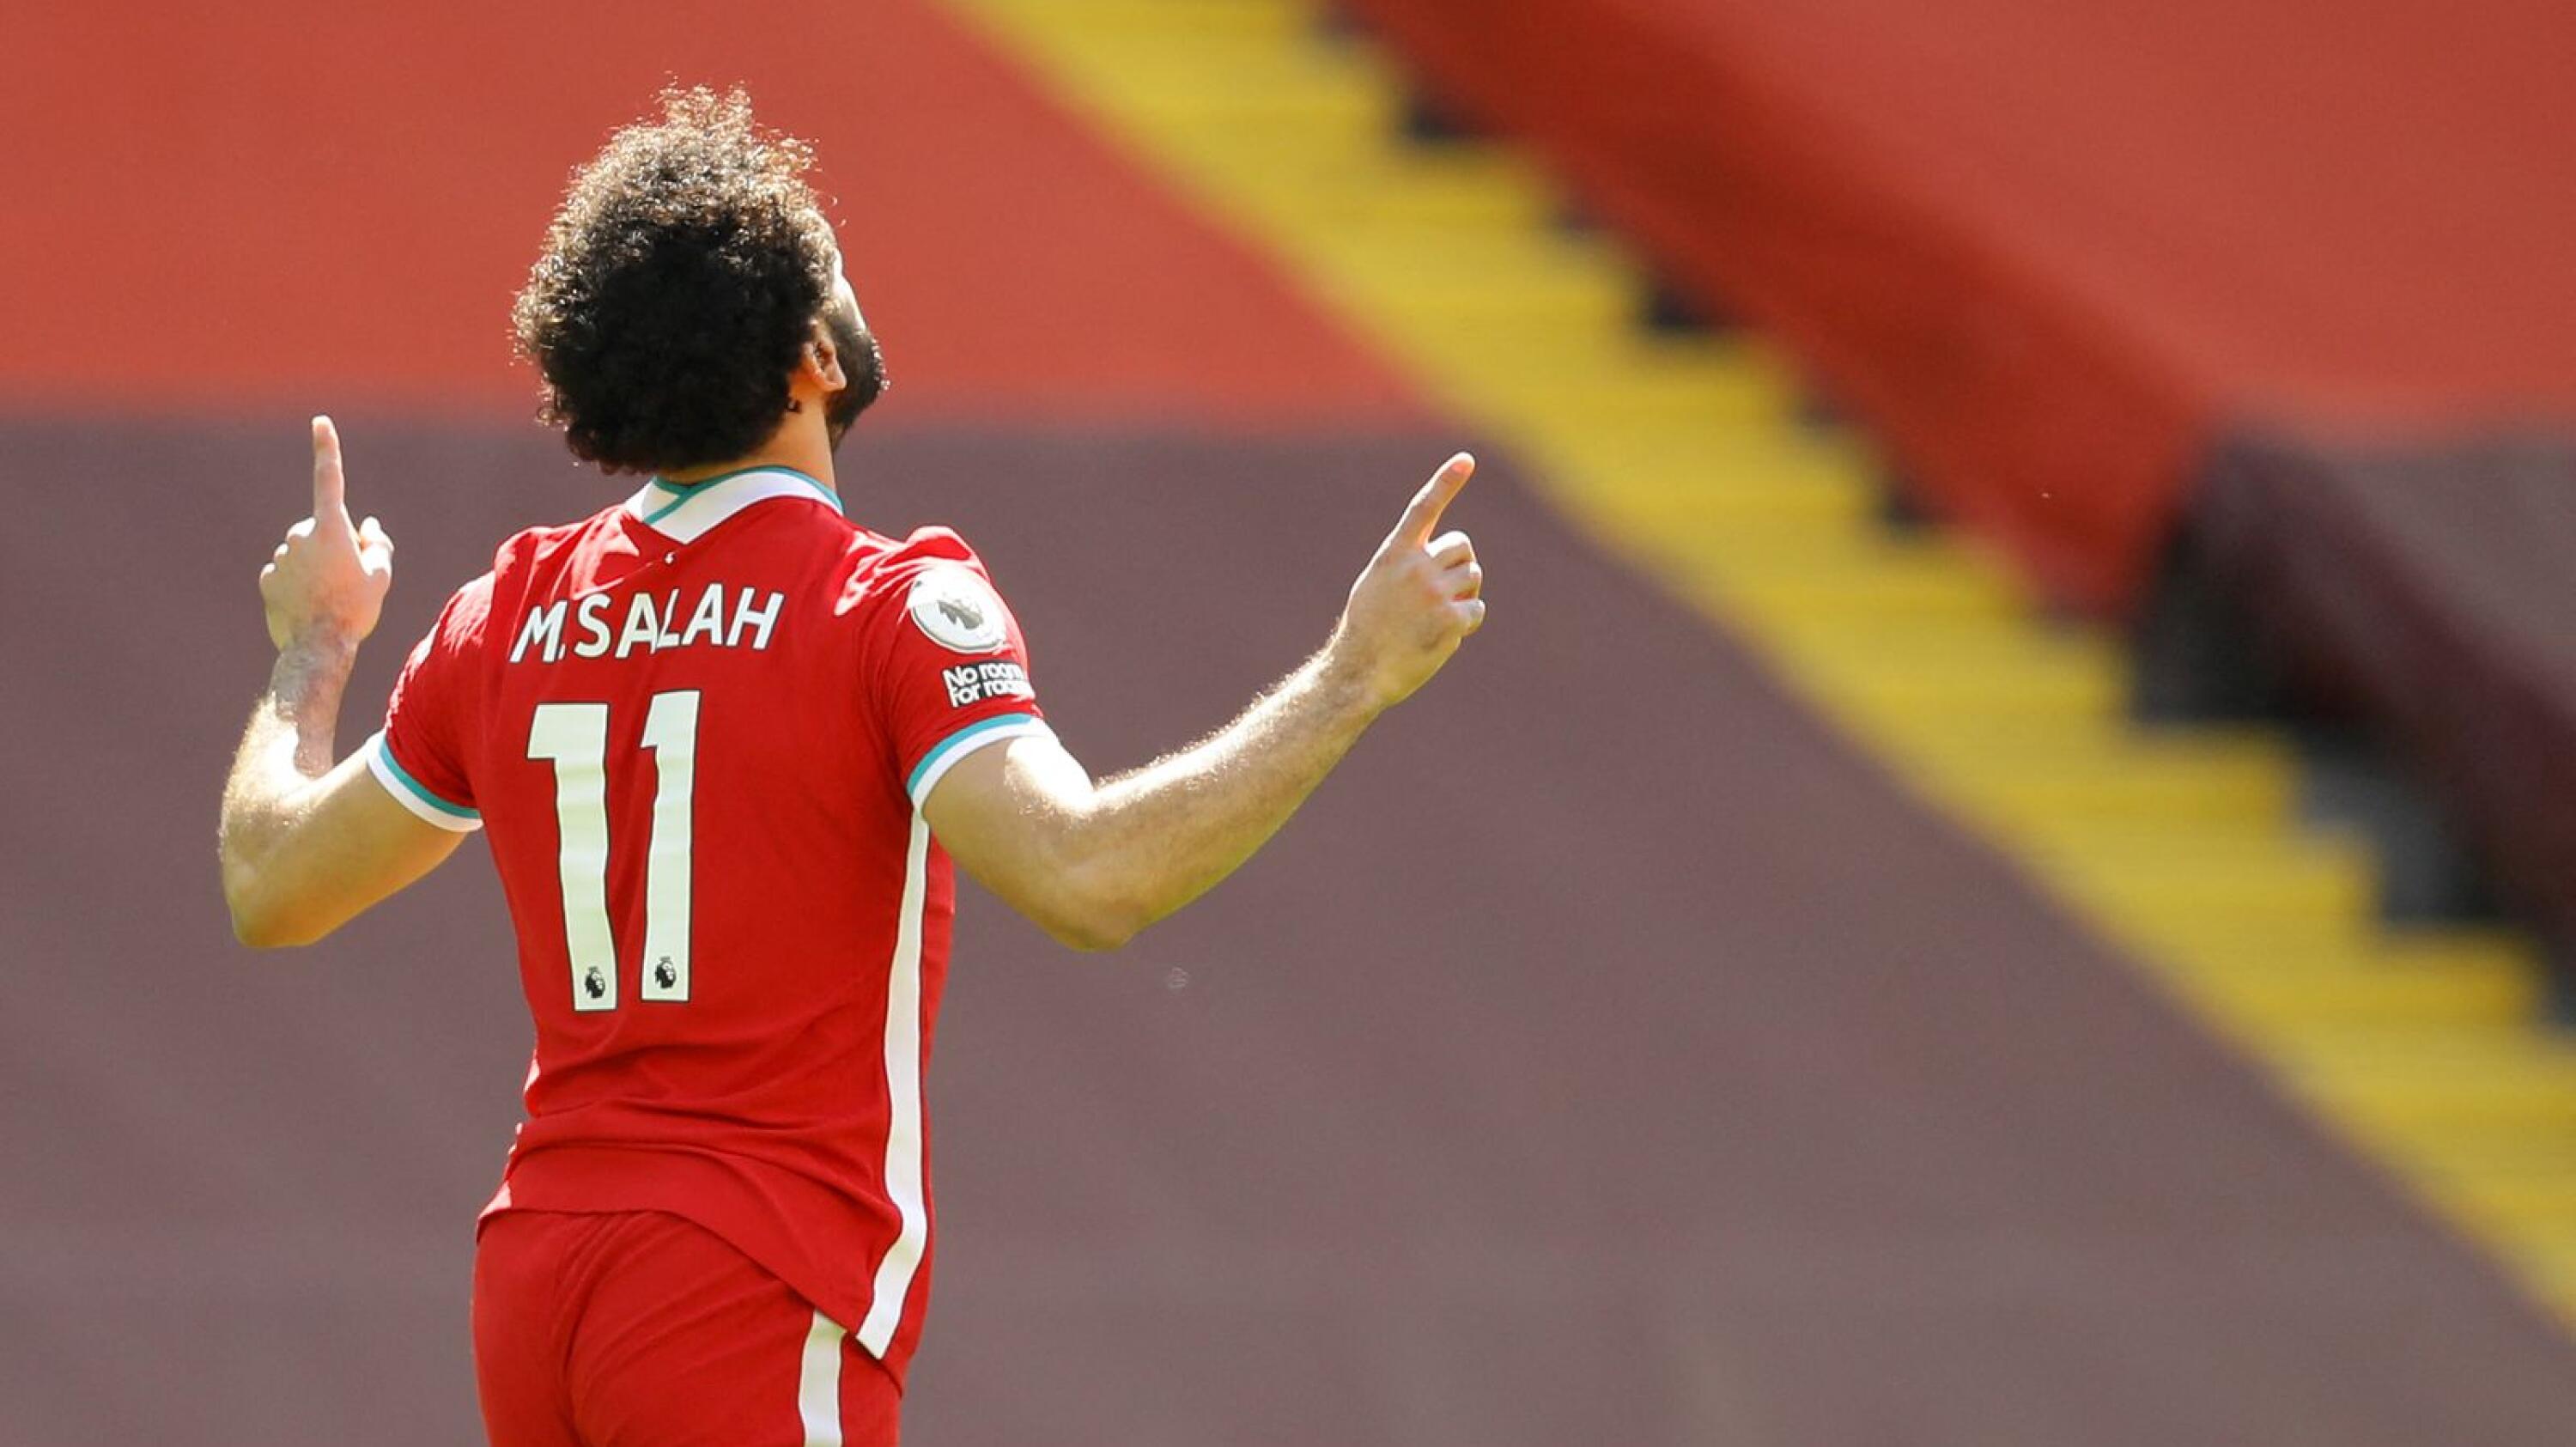 Liverpool's Egyptian midfielder Mohamed Salah celebrates scoring the opening goal during the English Premier League football match between Liverpool and Newcastle United at Anfield in Liverpool, north west England